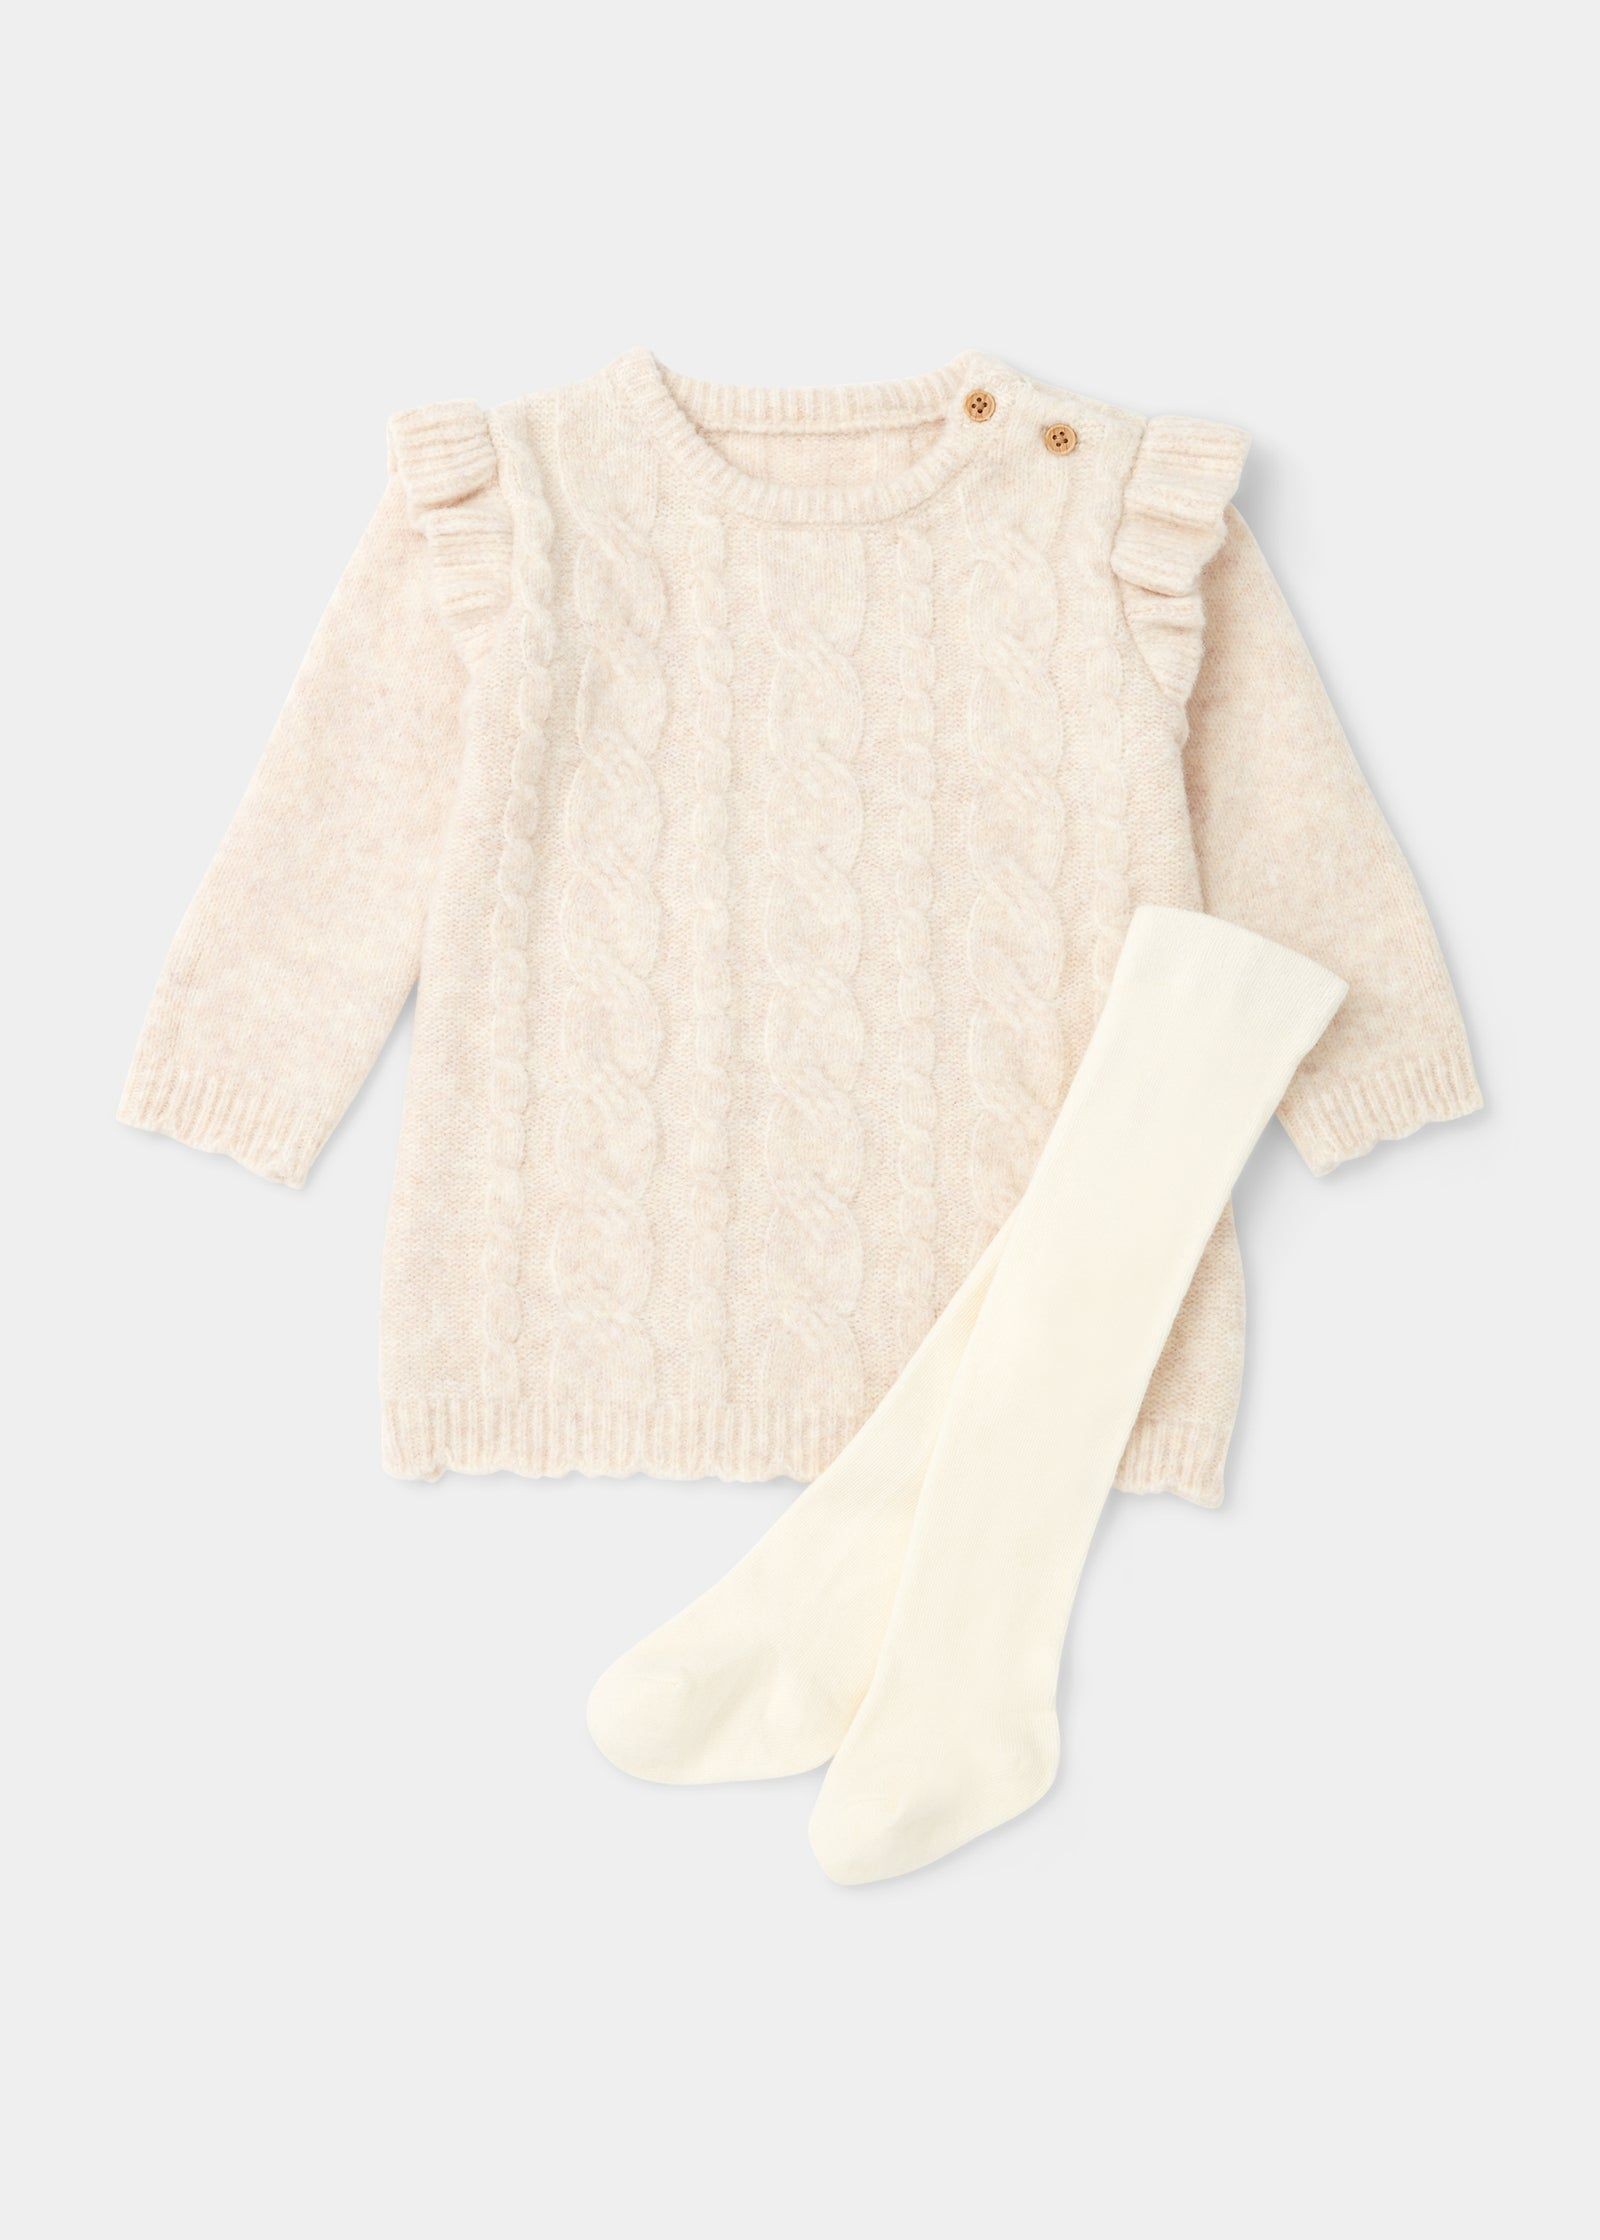 George Toddler Girls' Cable Knit Sweater Legging 